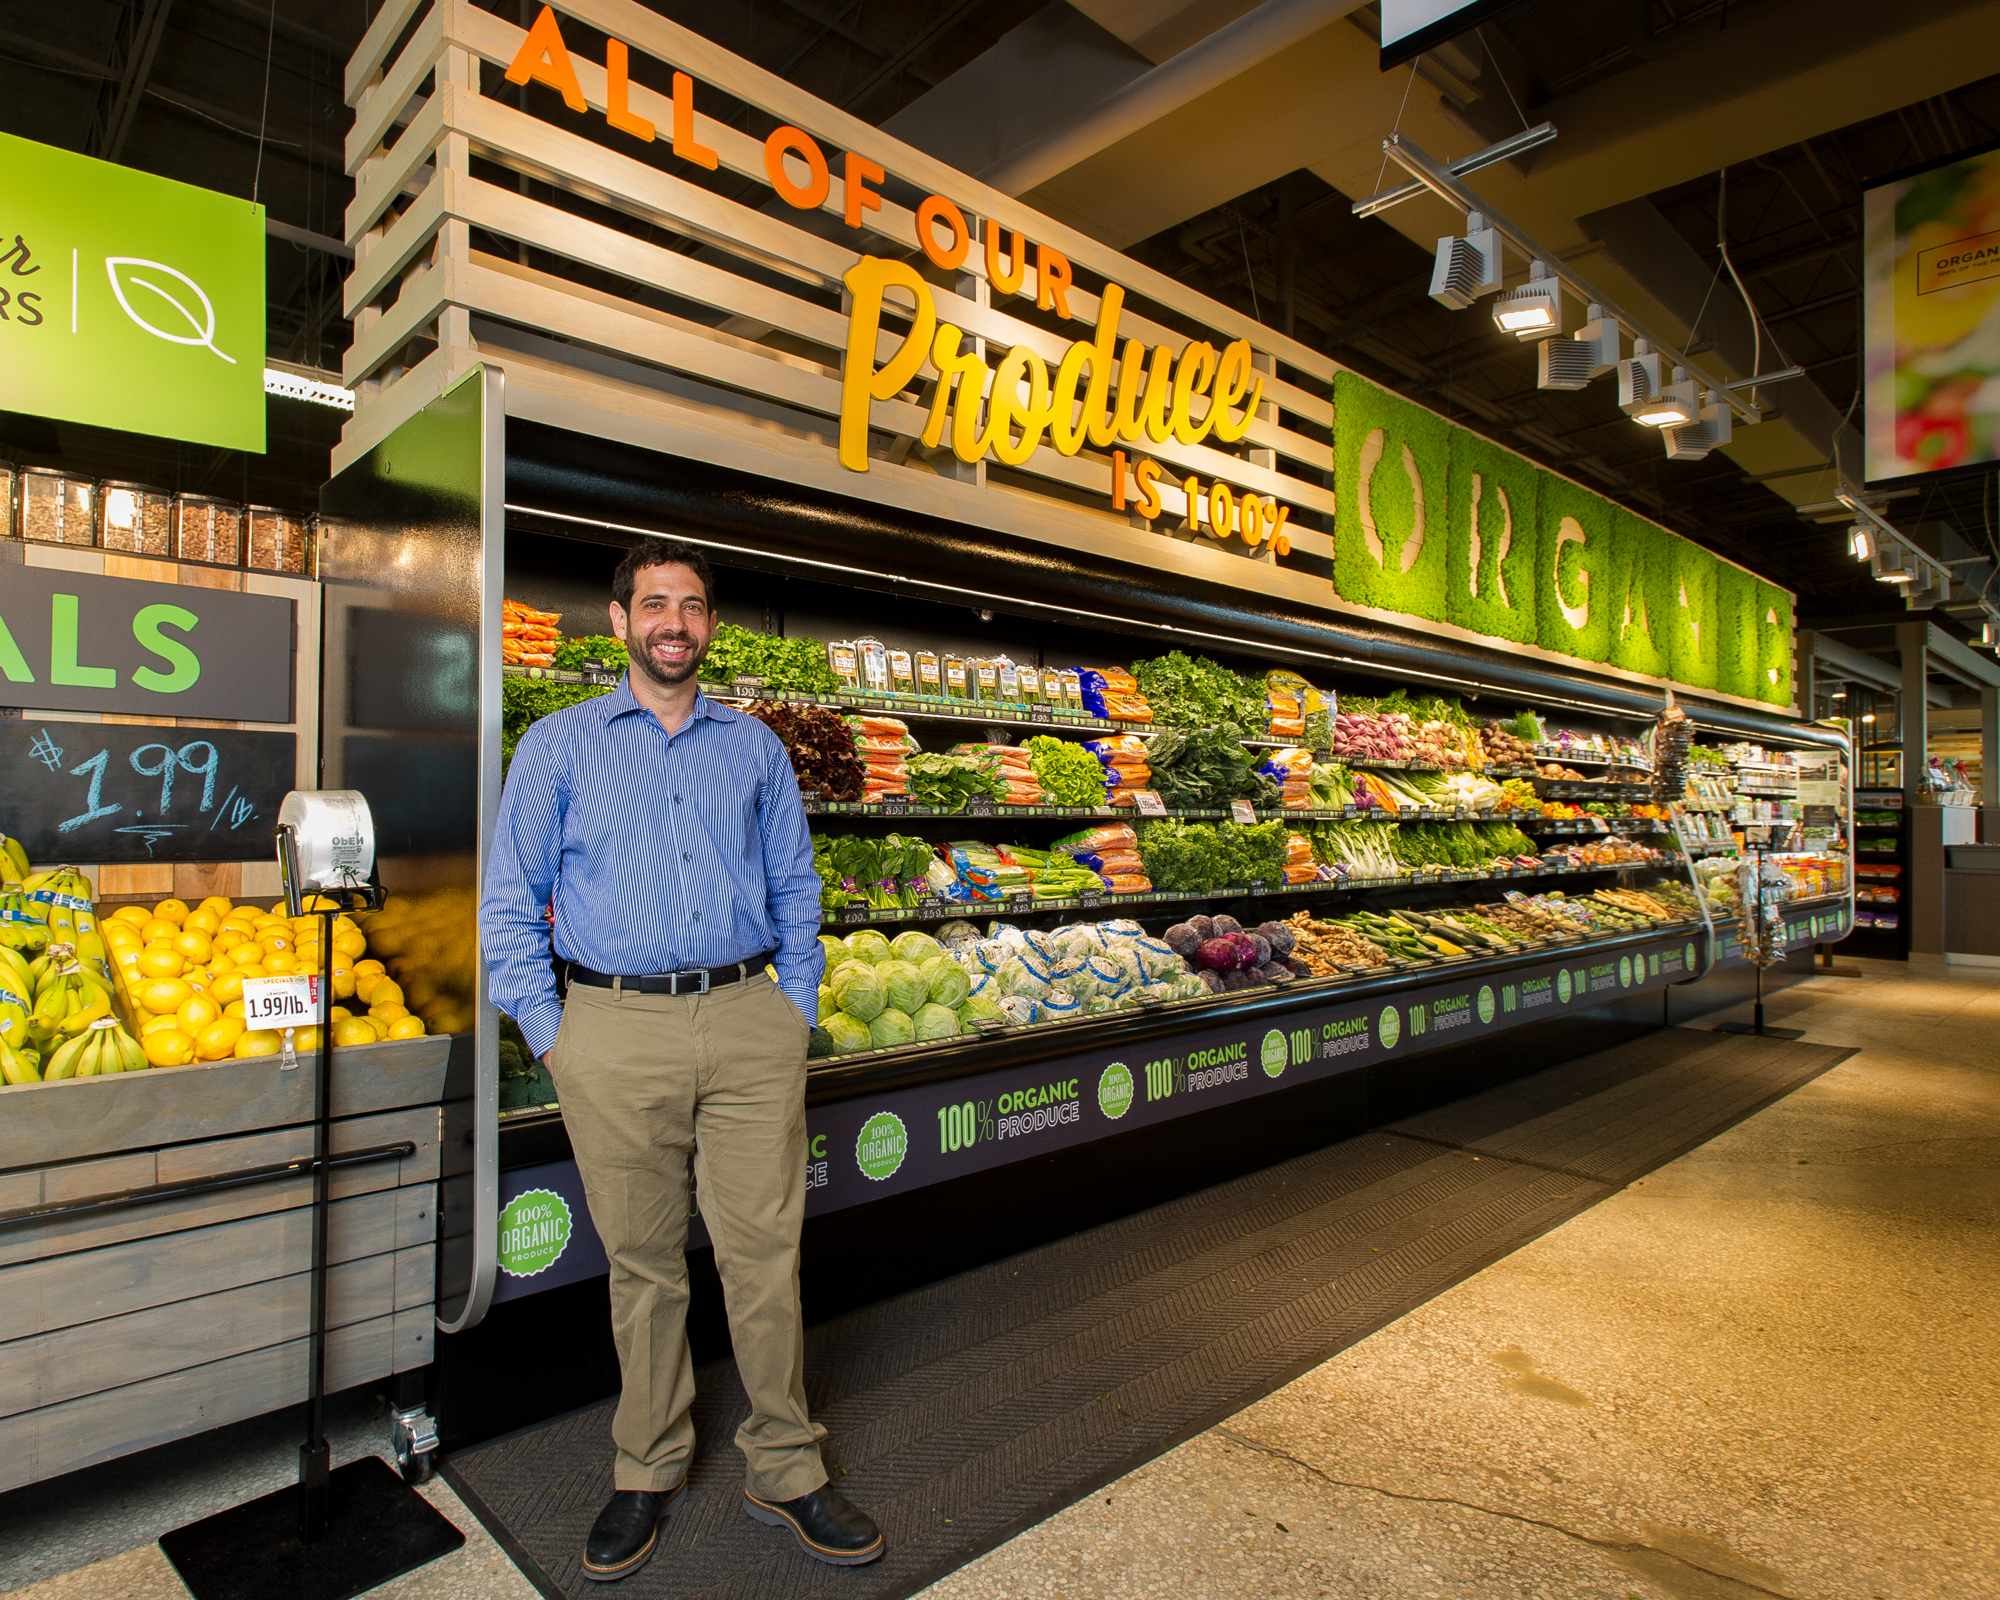 Native Sun Natural Foods Market owner Aaron Gottlieb opened his first store in Mandarin more than 22 years ago in February 1997.